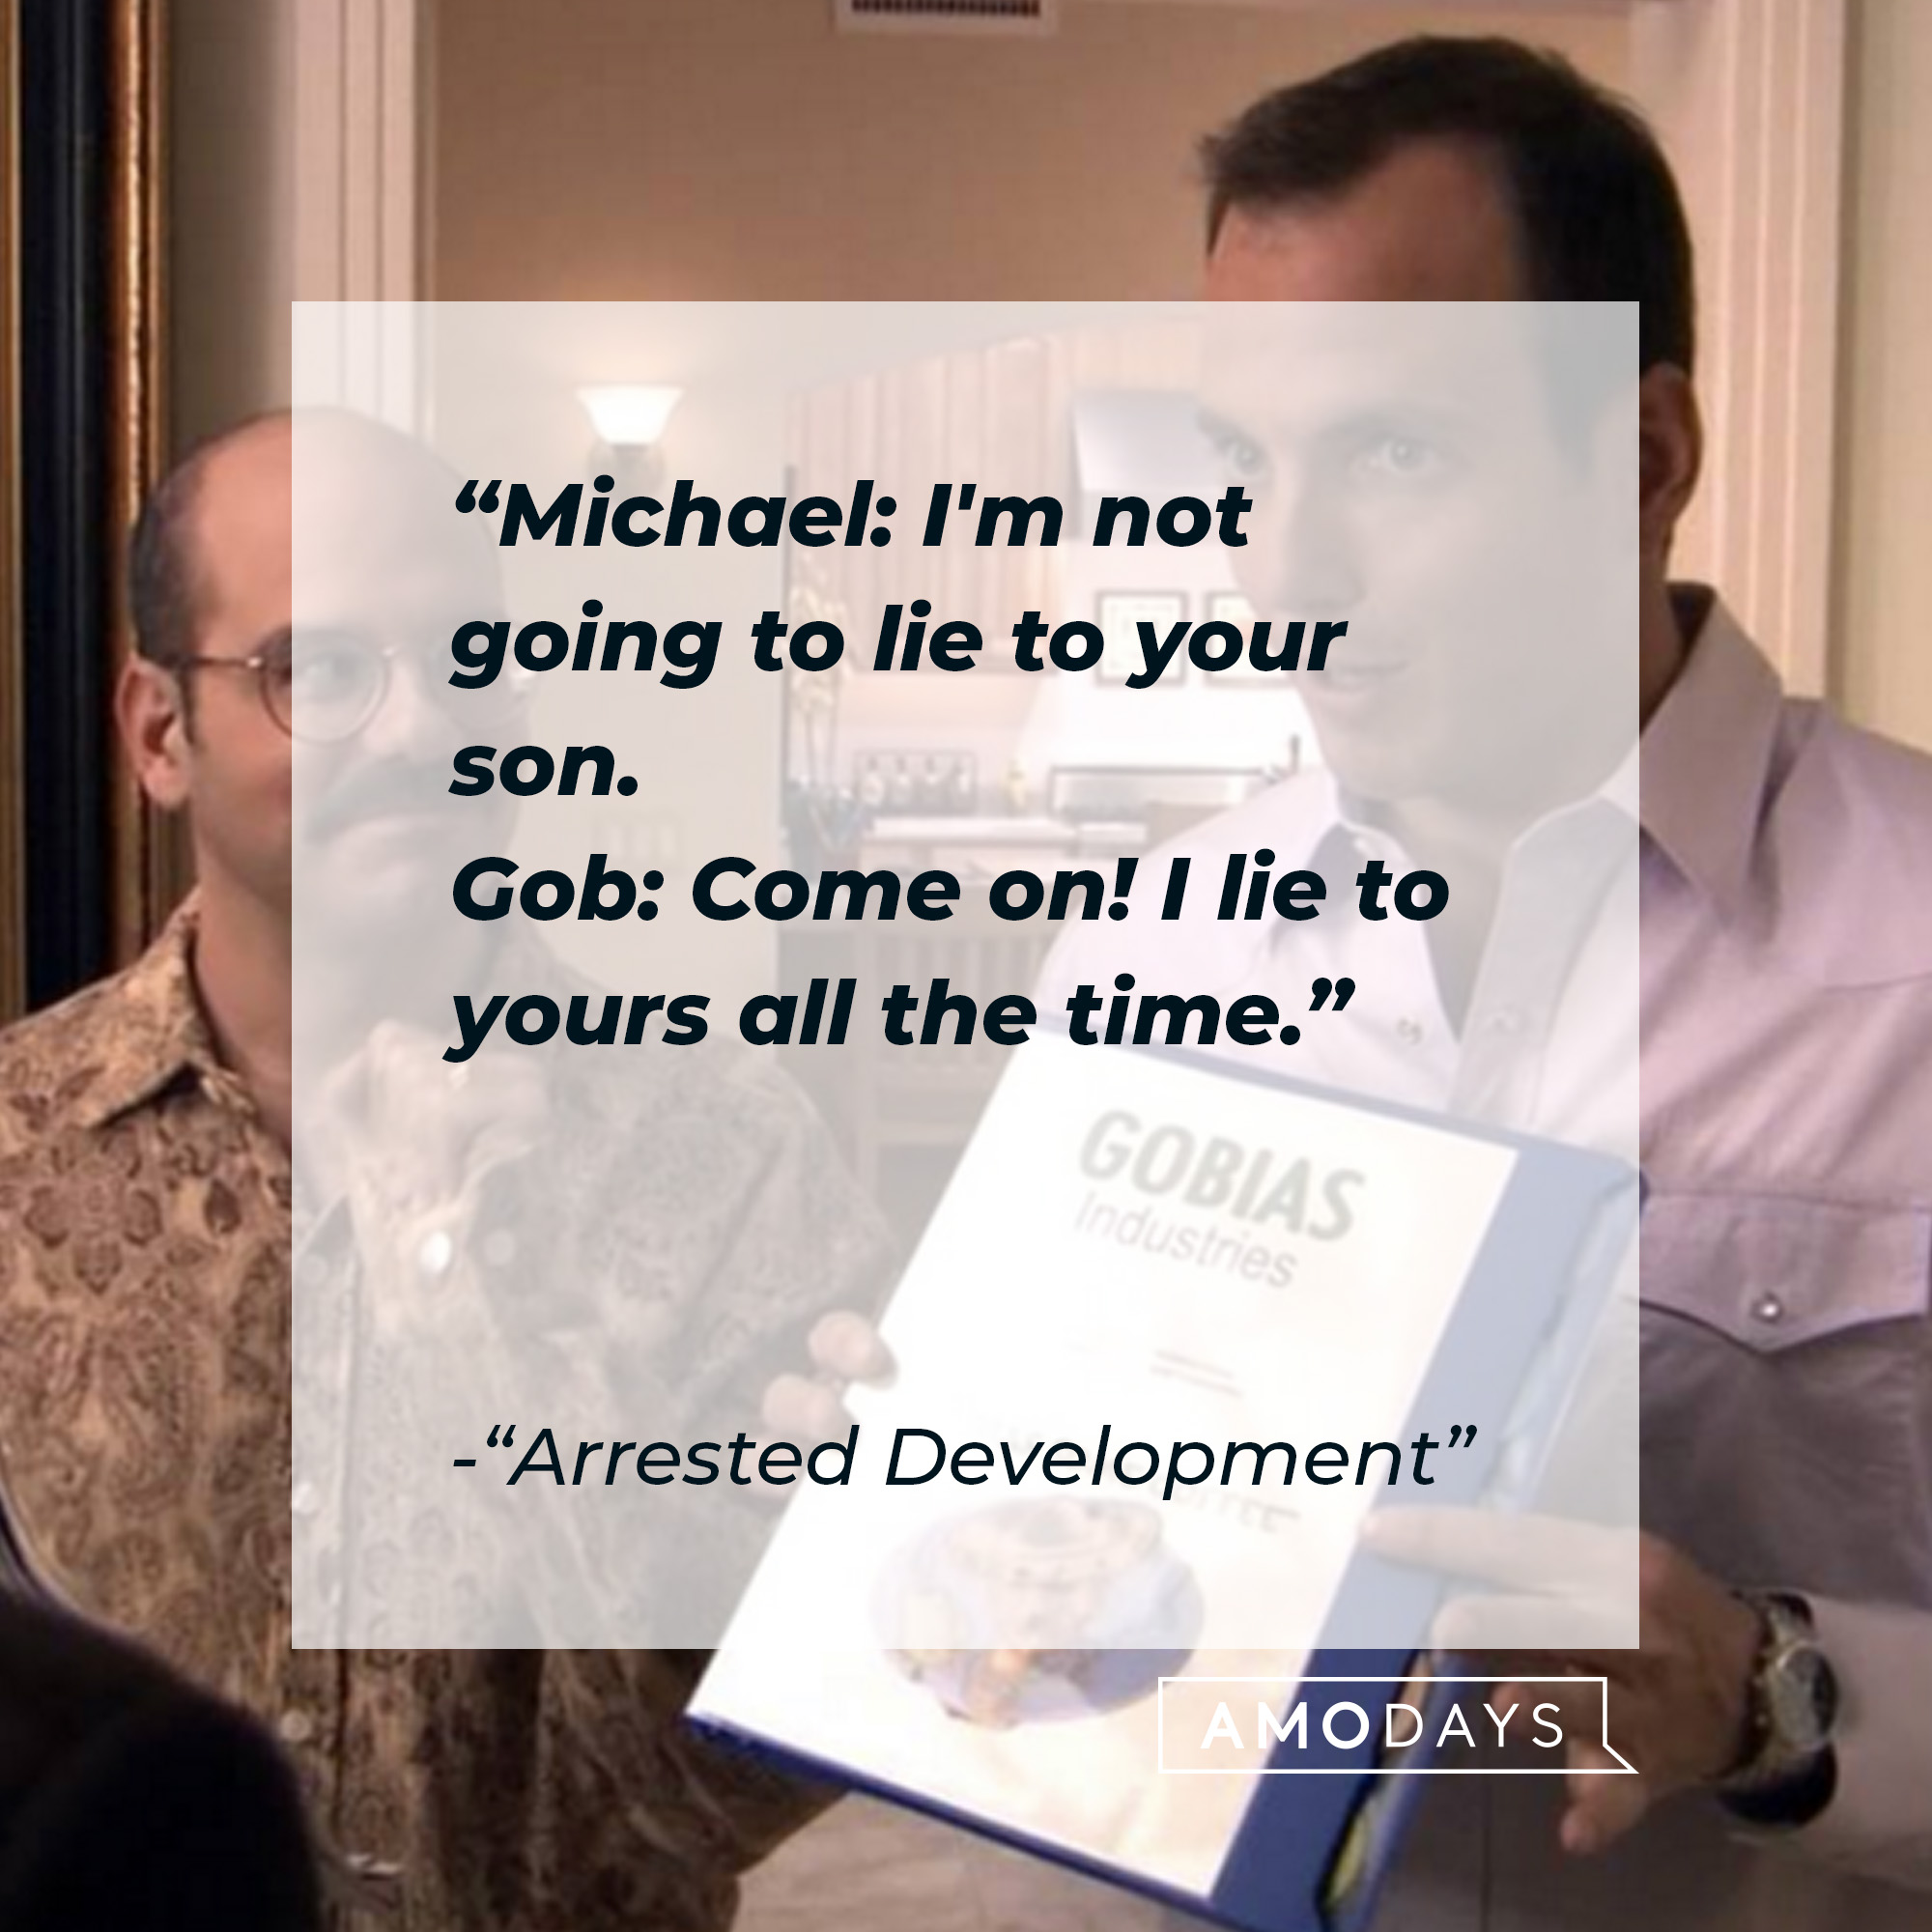 Quote from "Arrested Development:" "Michael: I'm not going to lie to your son. Gob: Come on! I lie to yours all the time." | Source: facebook.com/ArrestedDevelopment